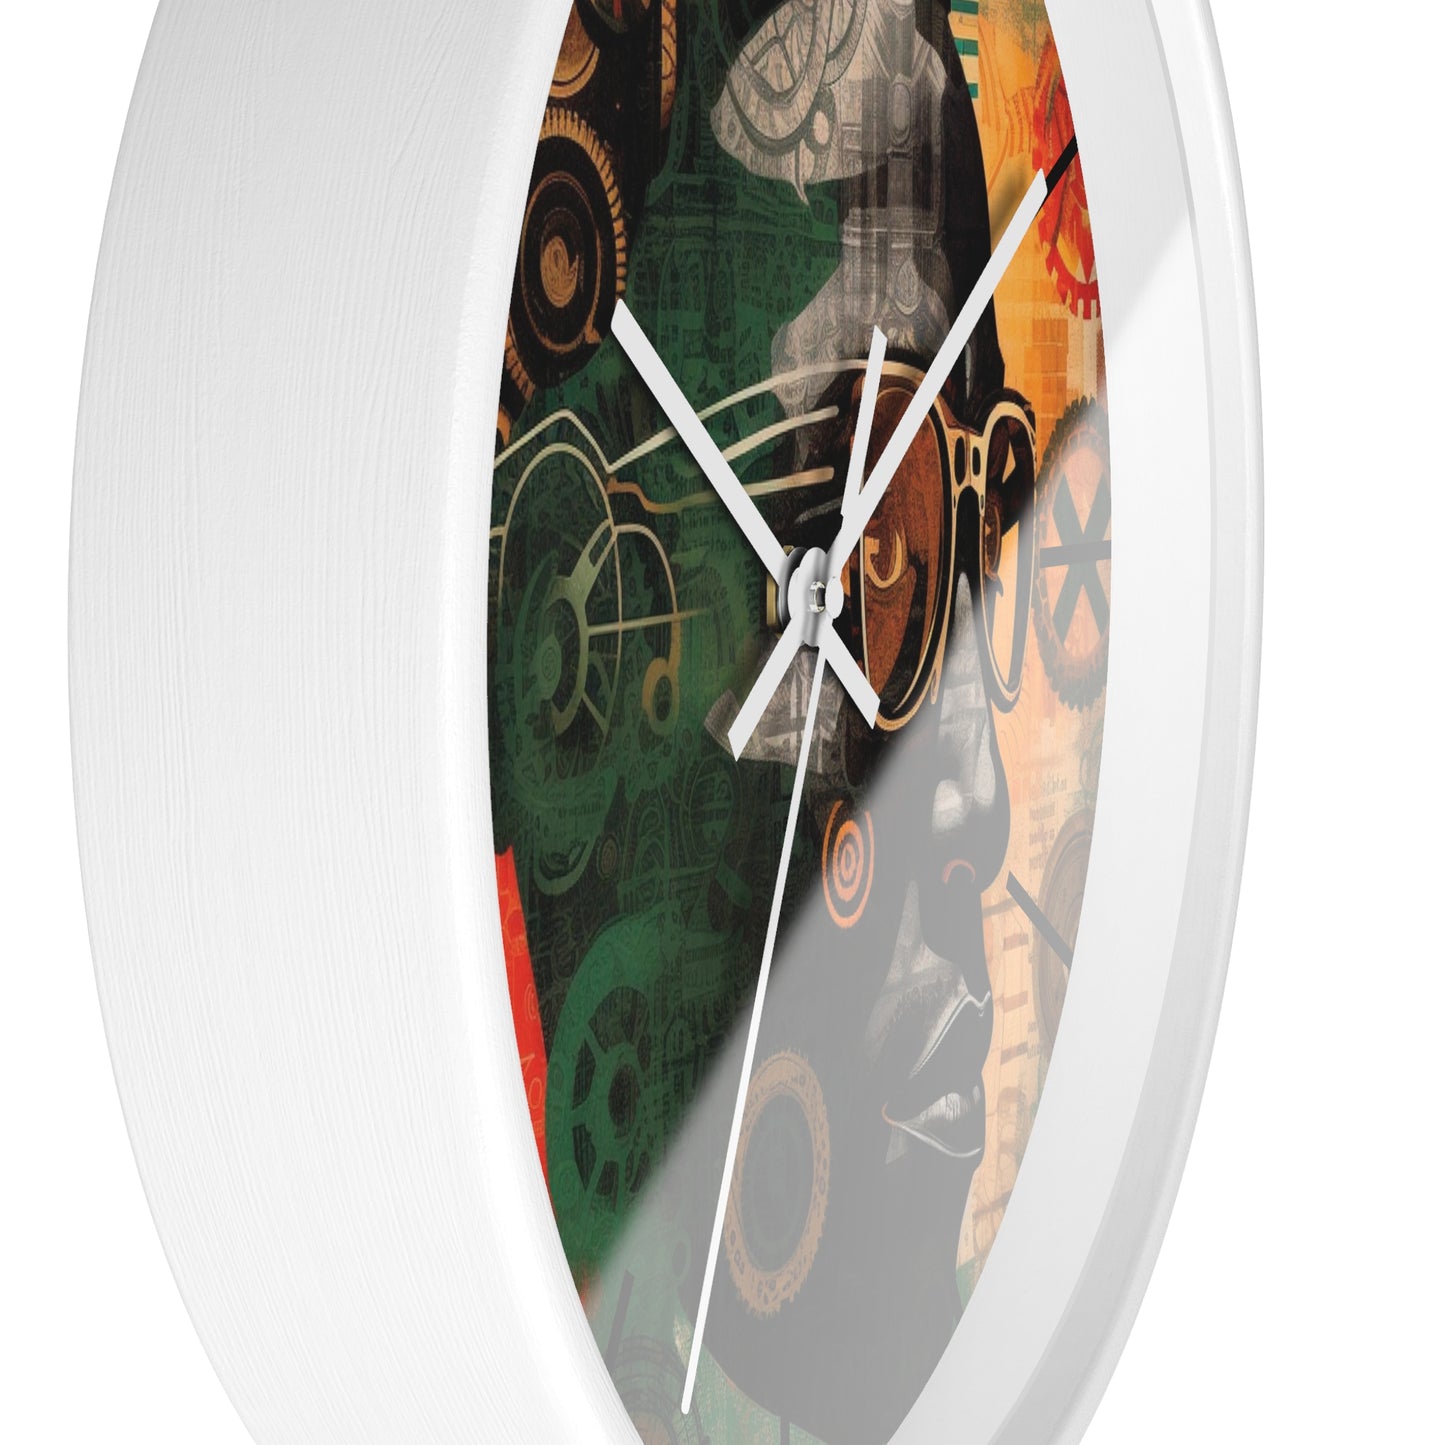 "In Thought" Wall Clock